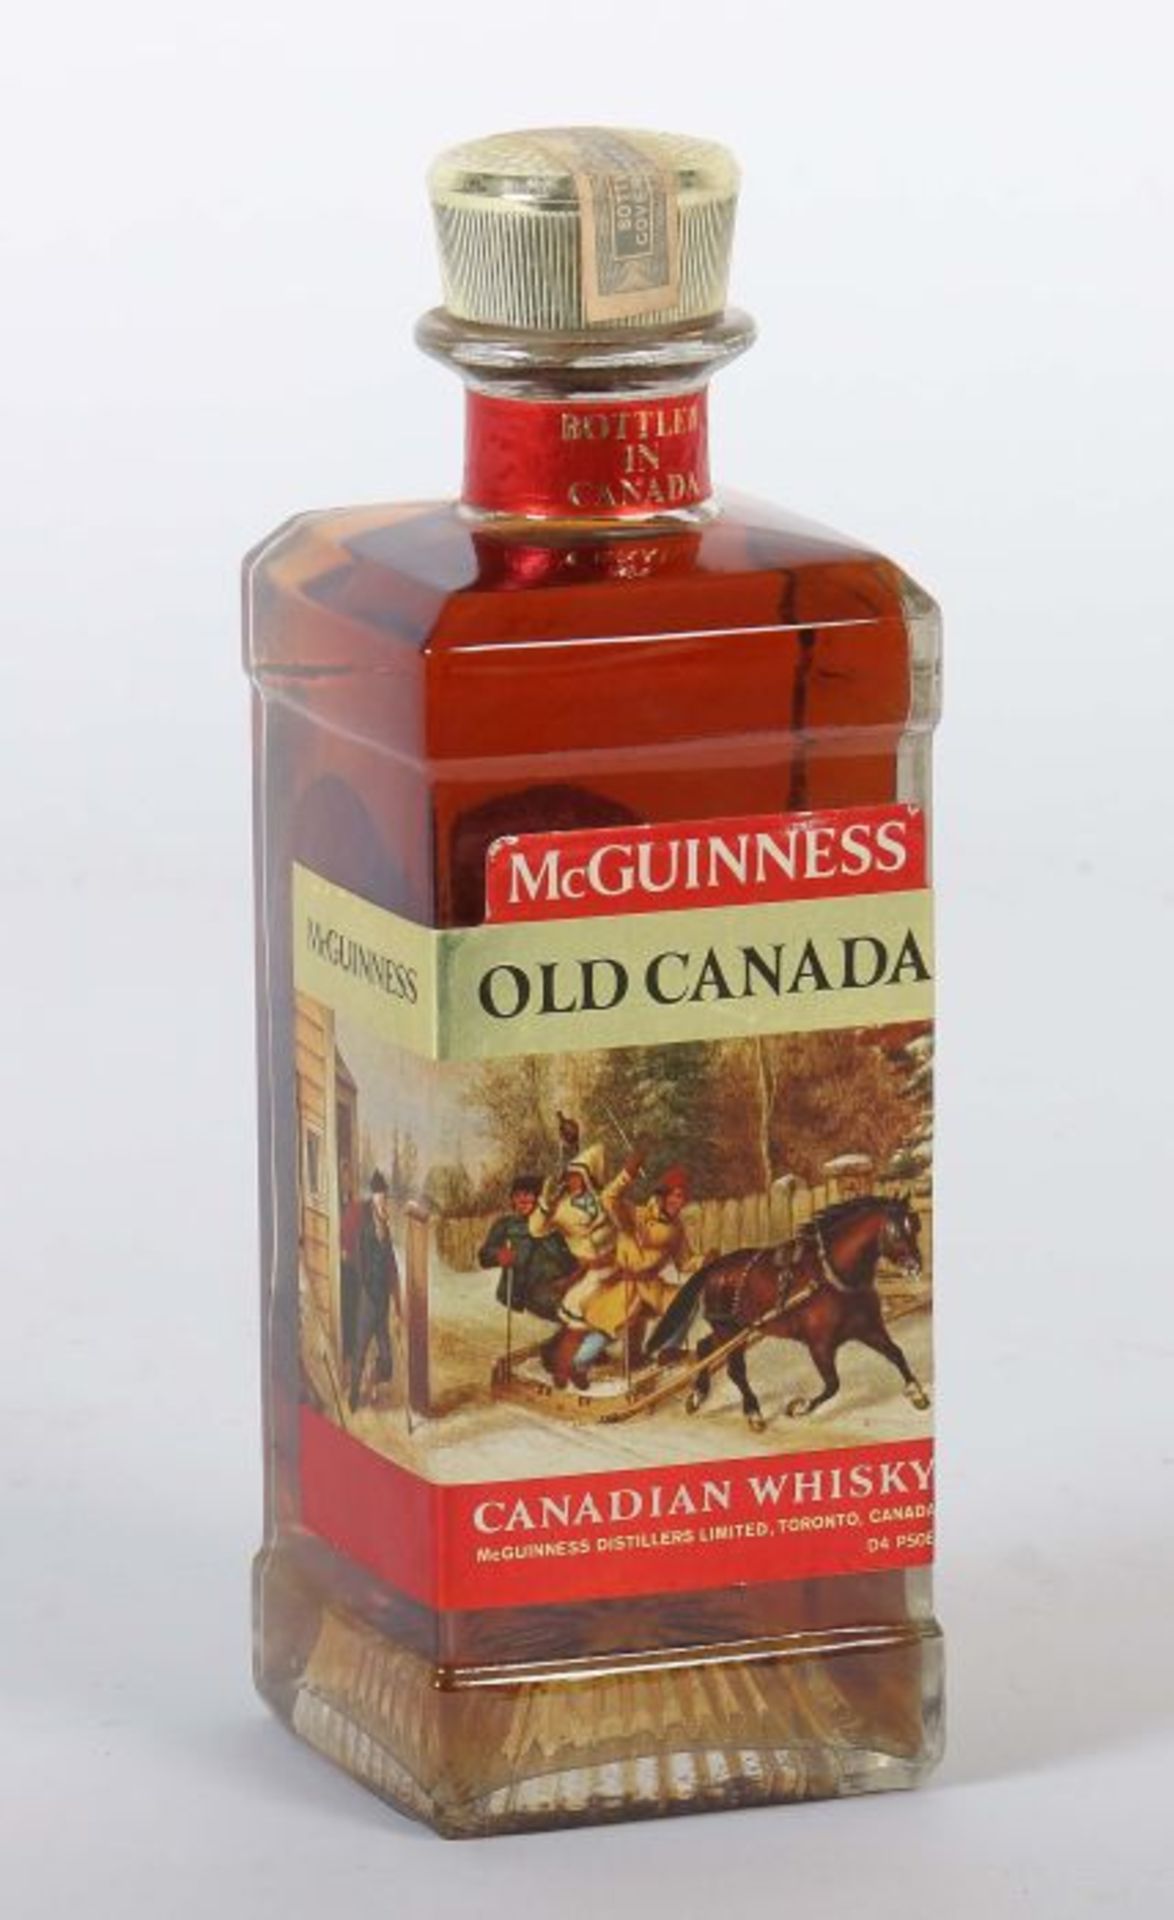 McGuinness Old Canada, Canadian Whisky, 1970er Jahre, 43% vol., 0,7 l.